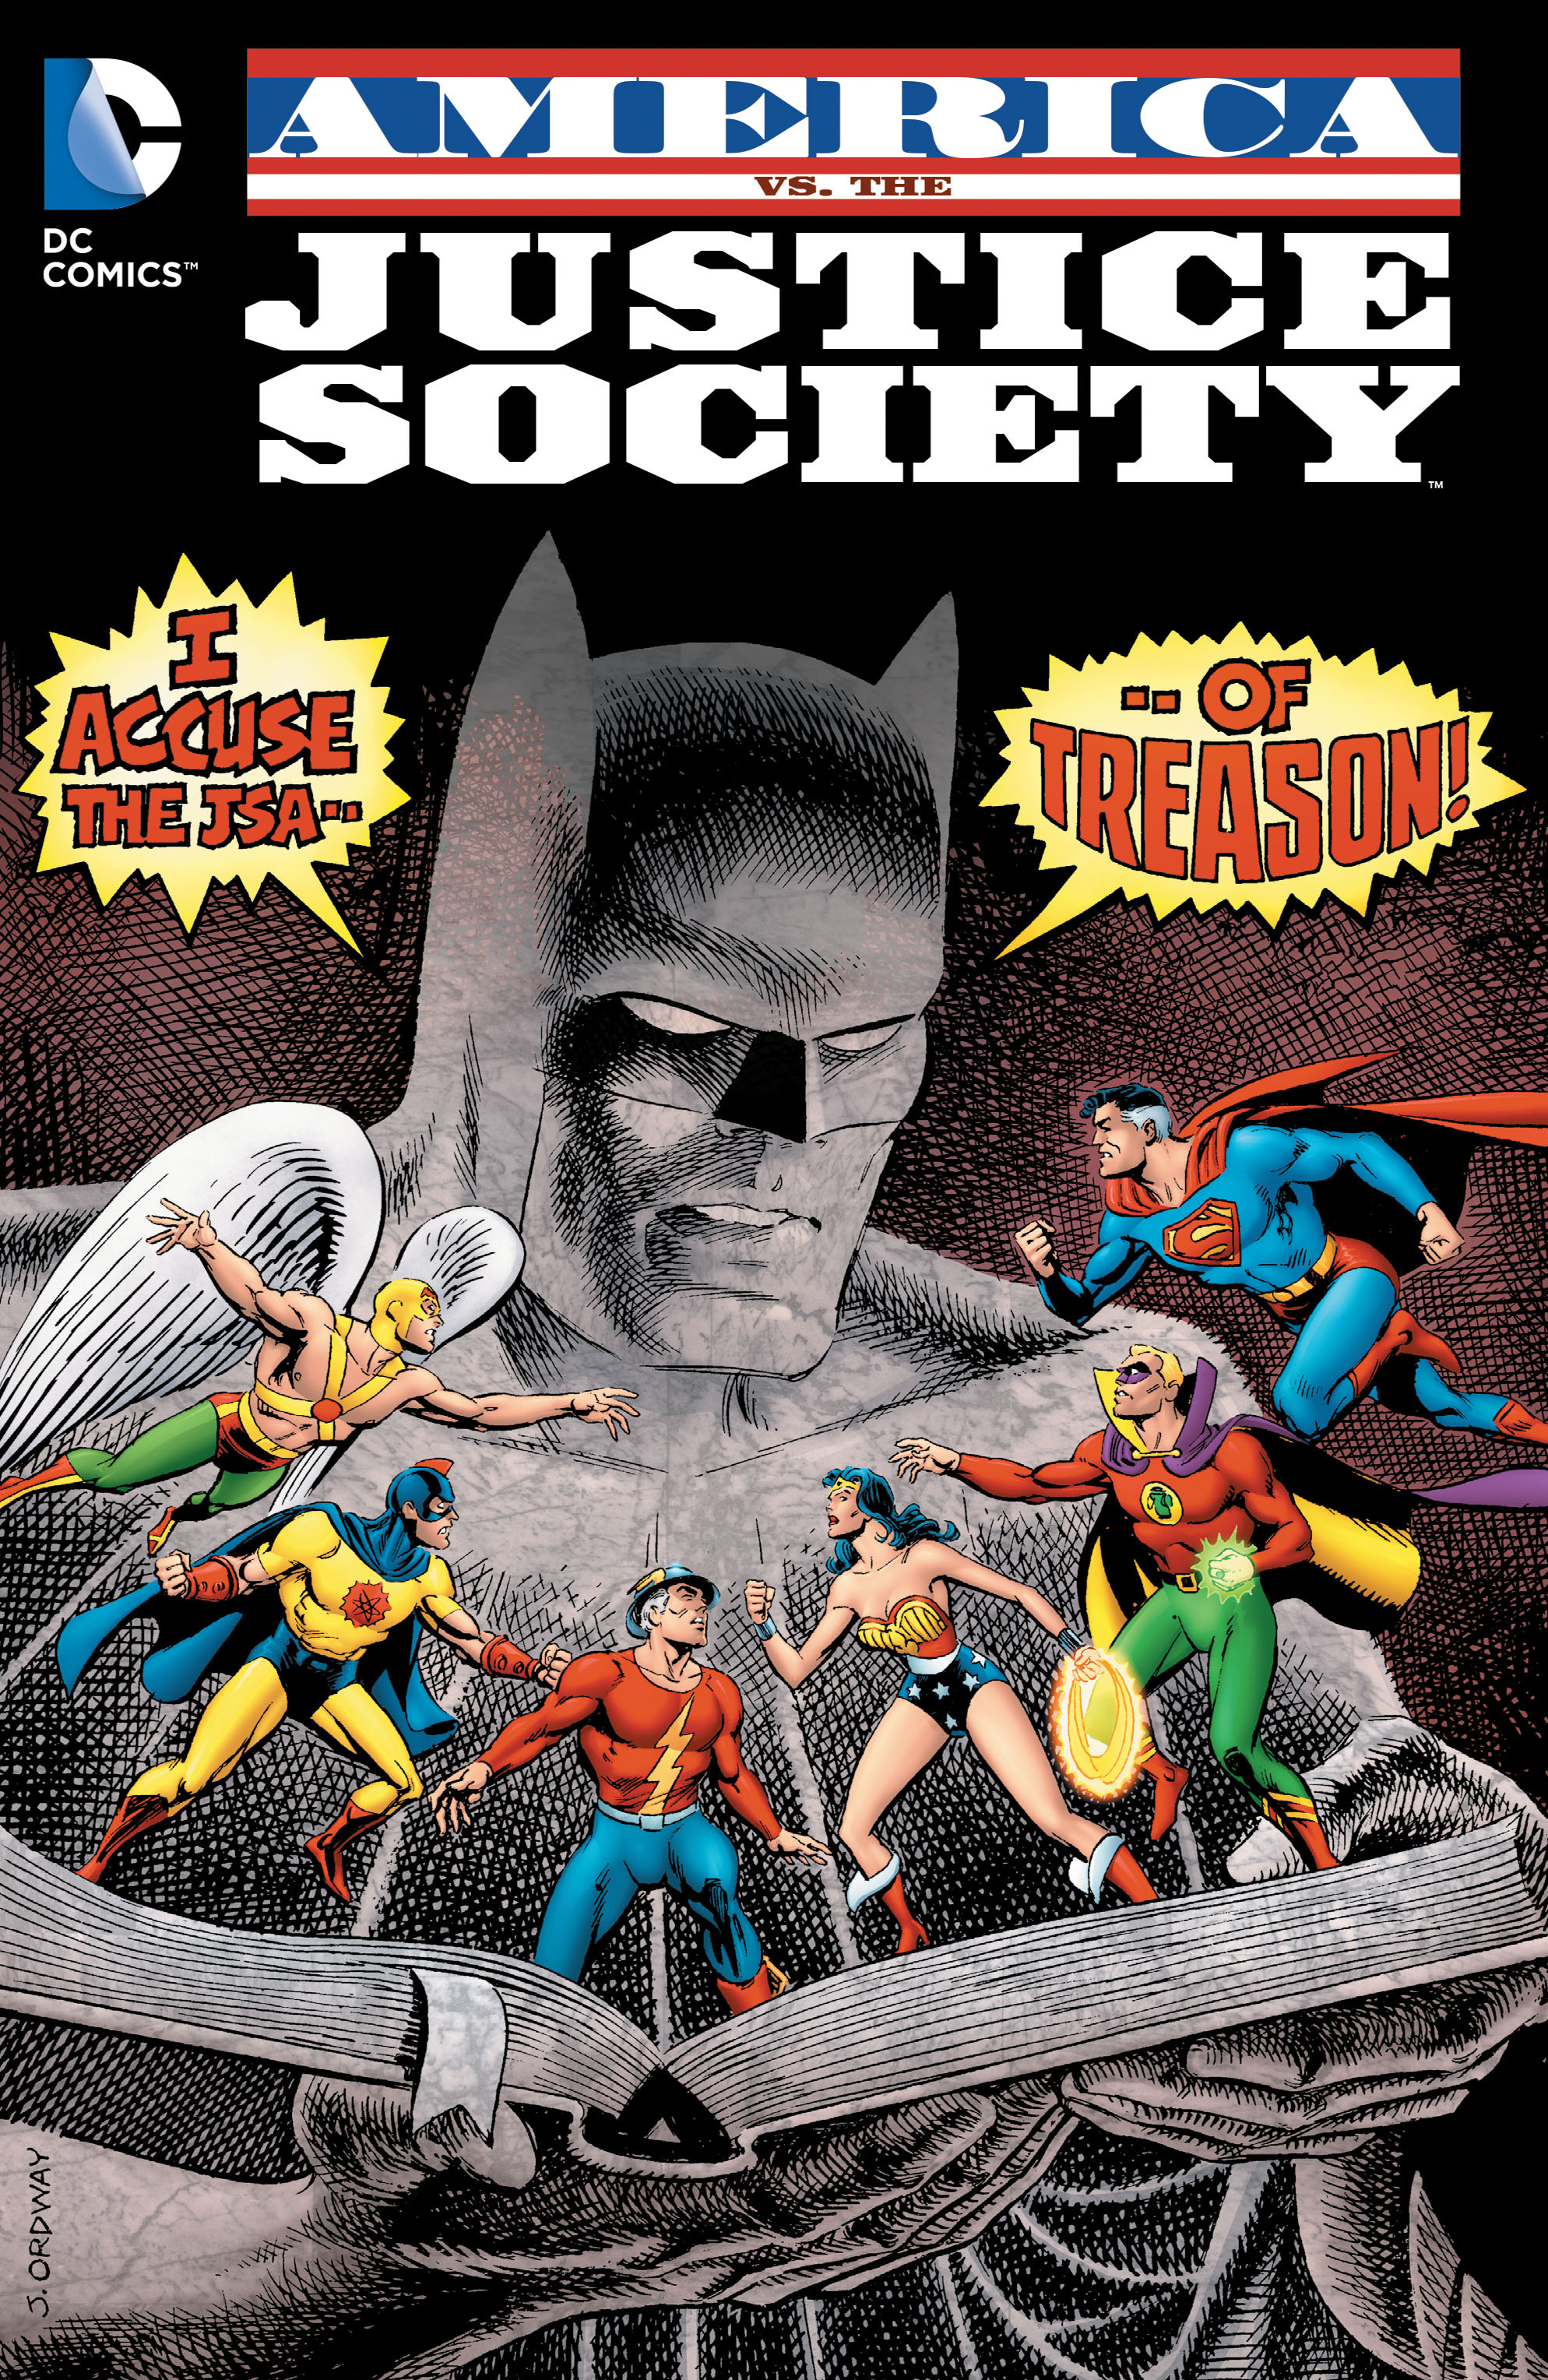 Read online America vs. the Justice Society comic -  Issue # TPB - 1